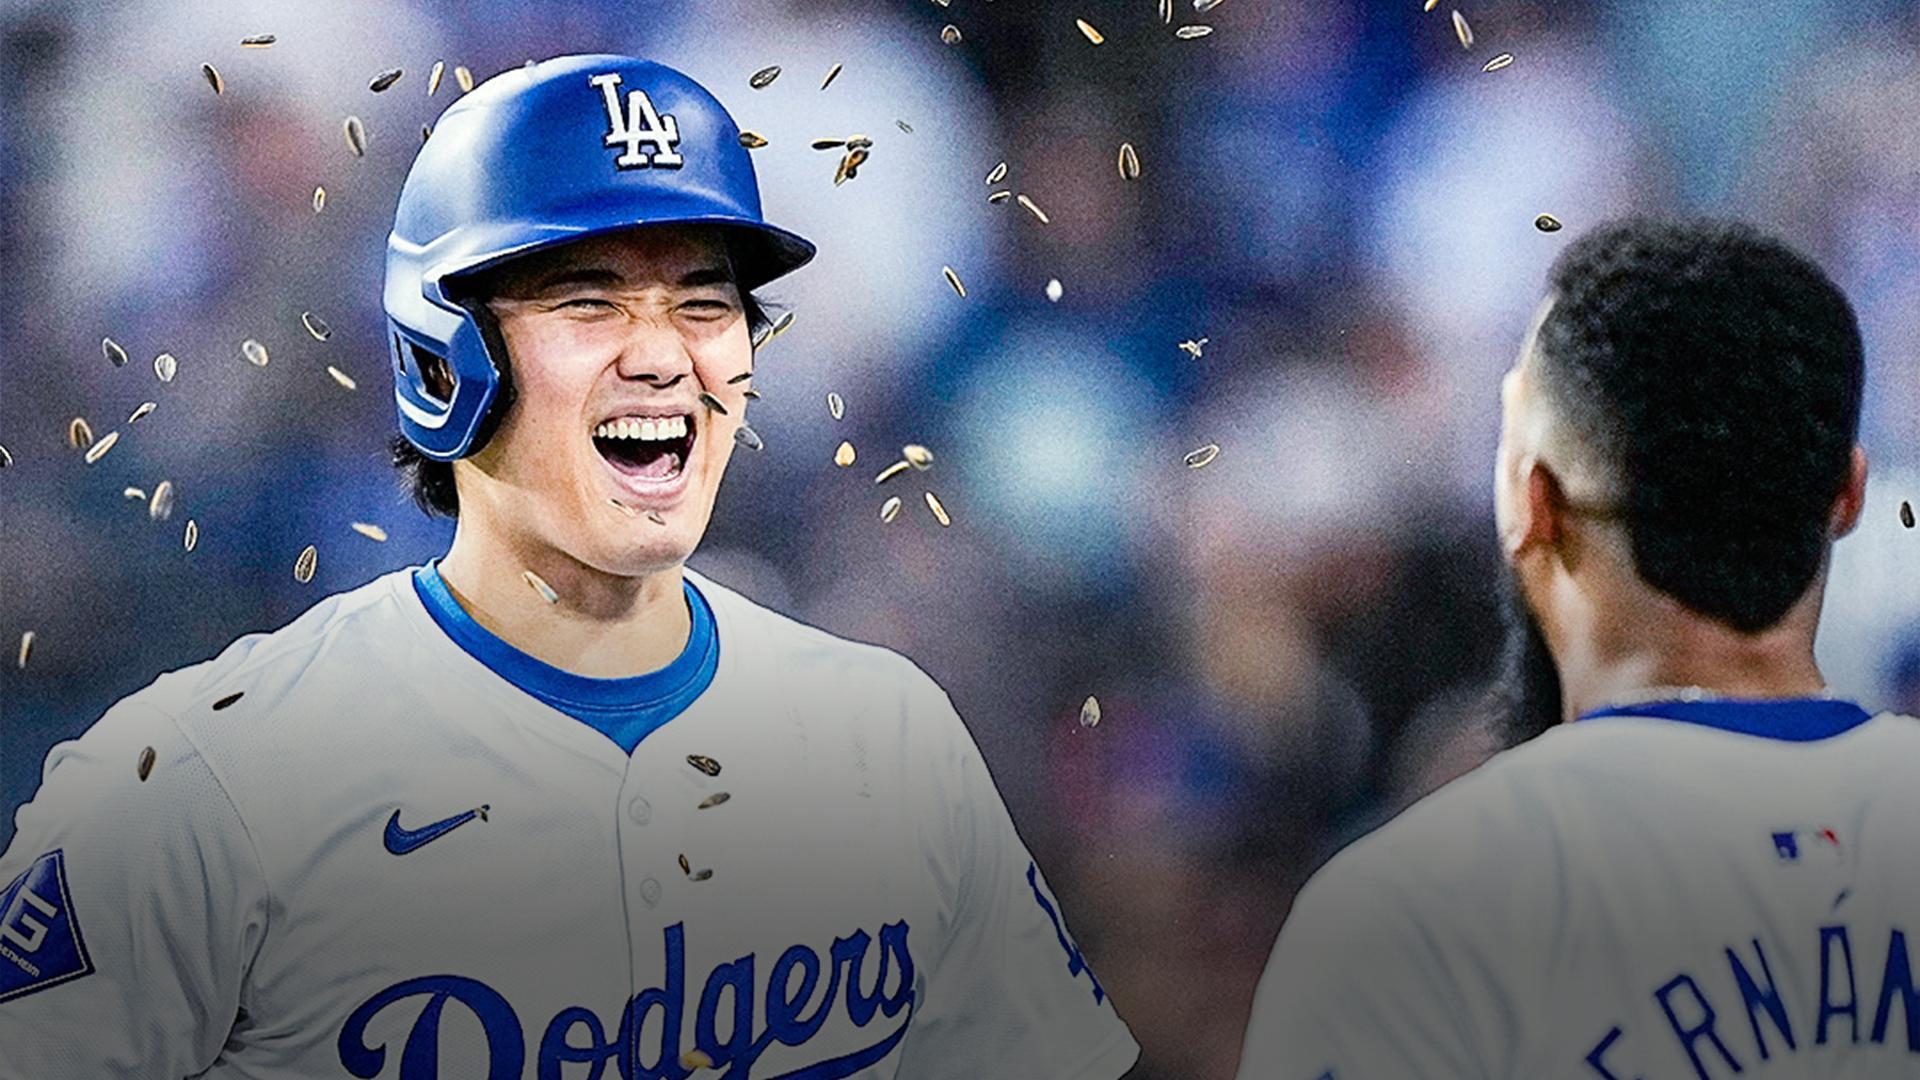 Ohtani hits 2-run homer and scores go-ahead run on his special day in LA as Dodgers beat Reds 7-3